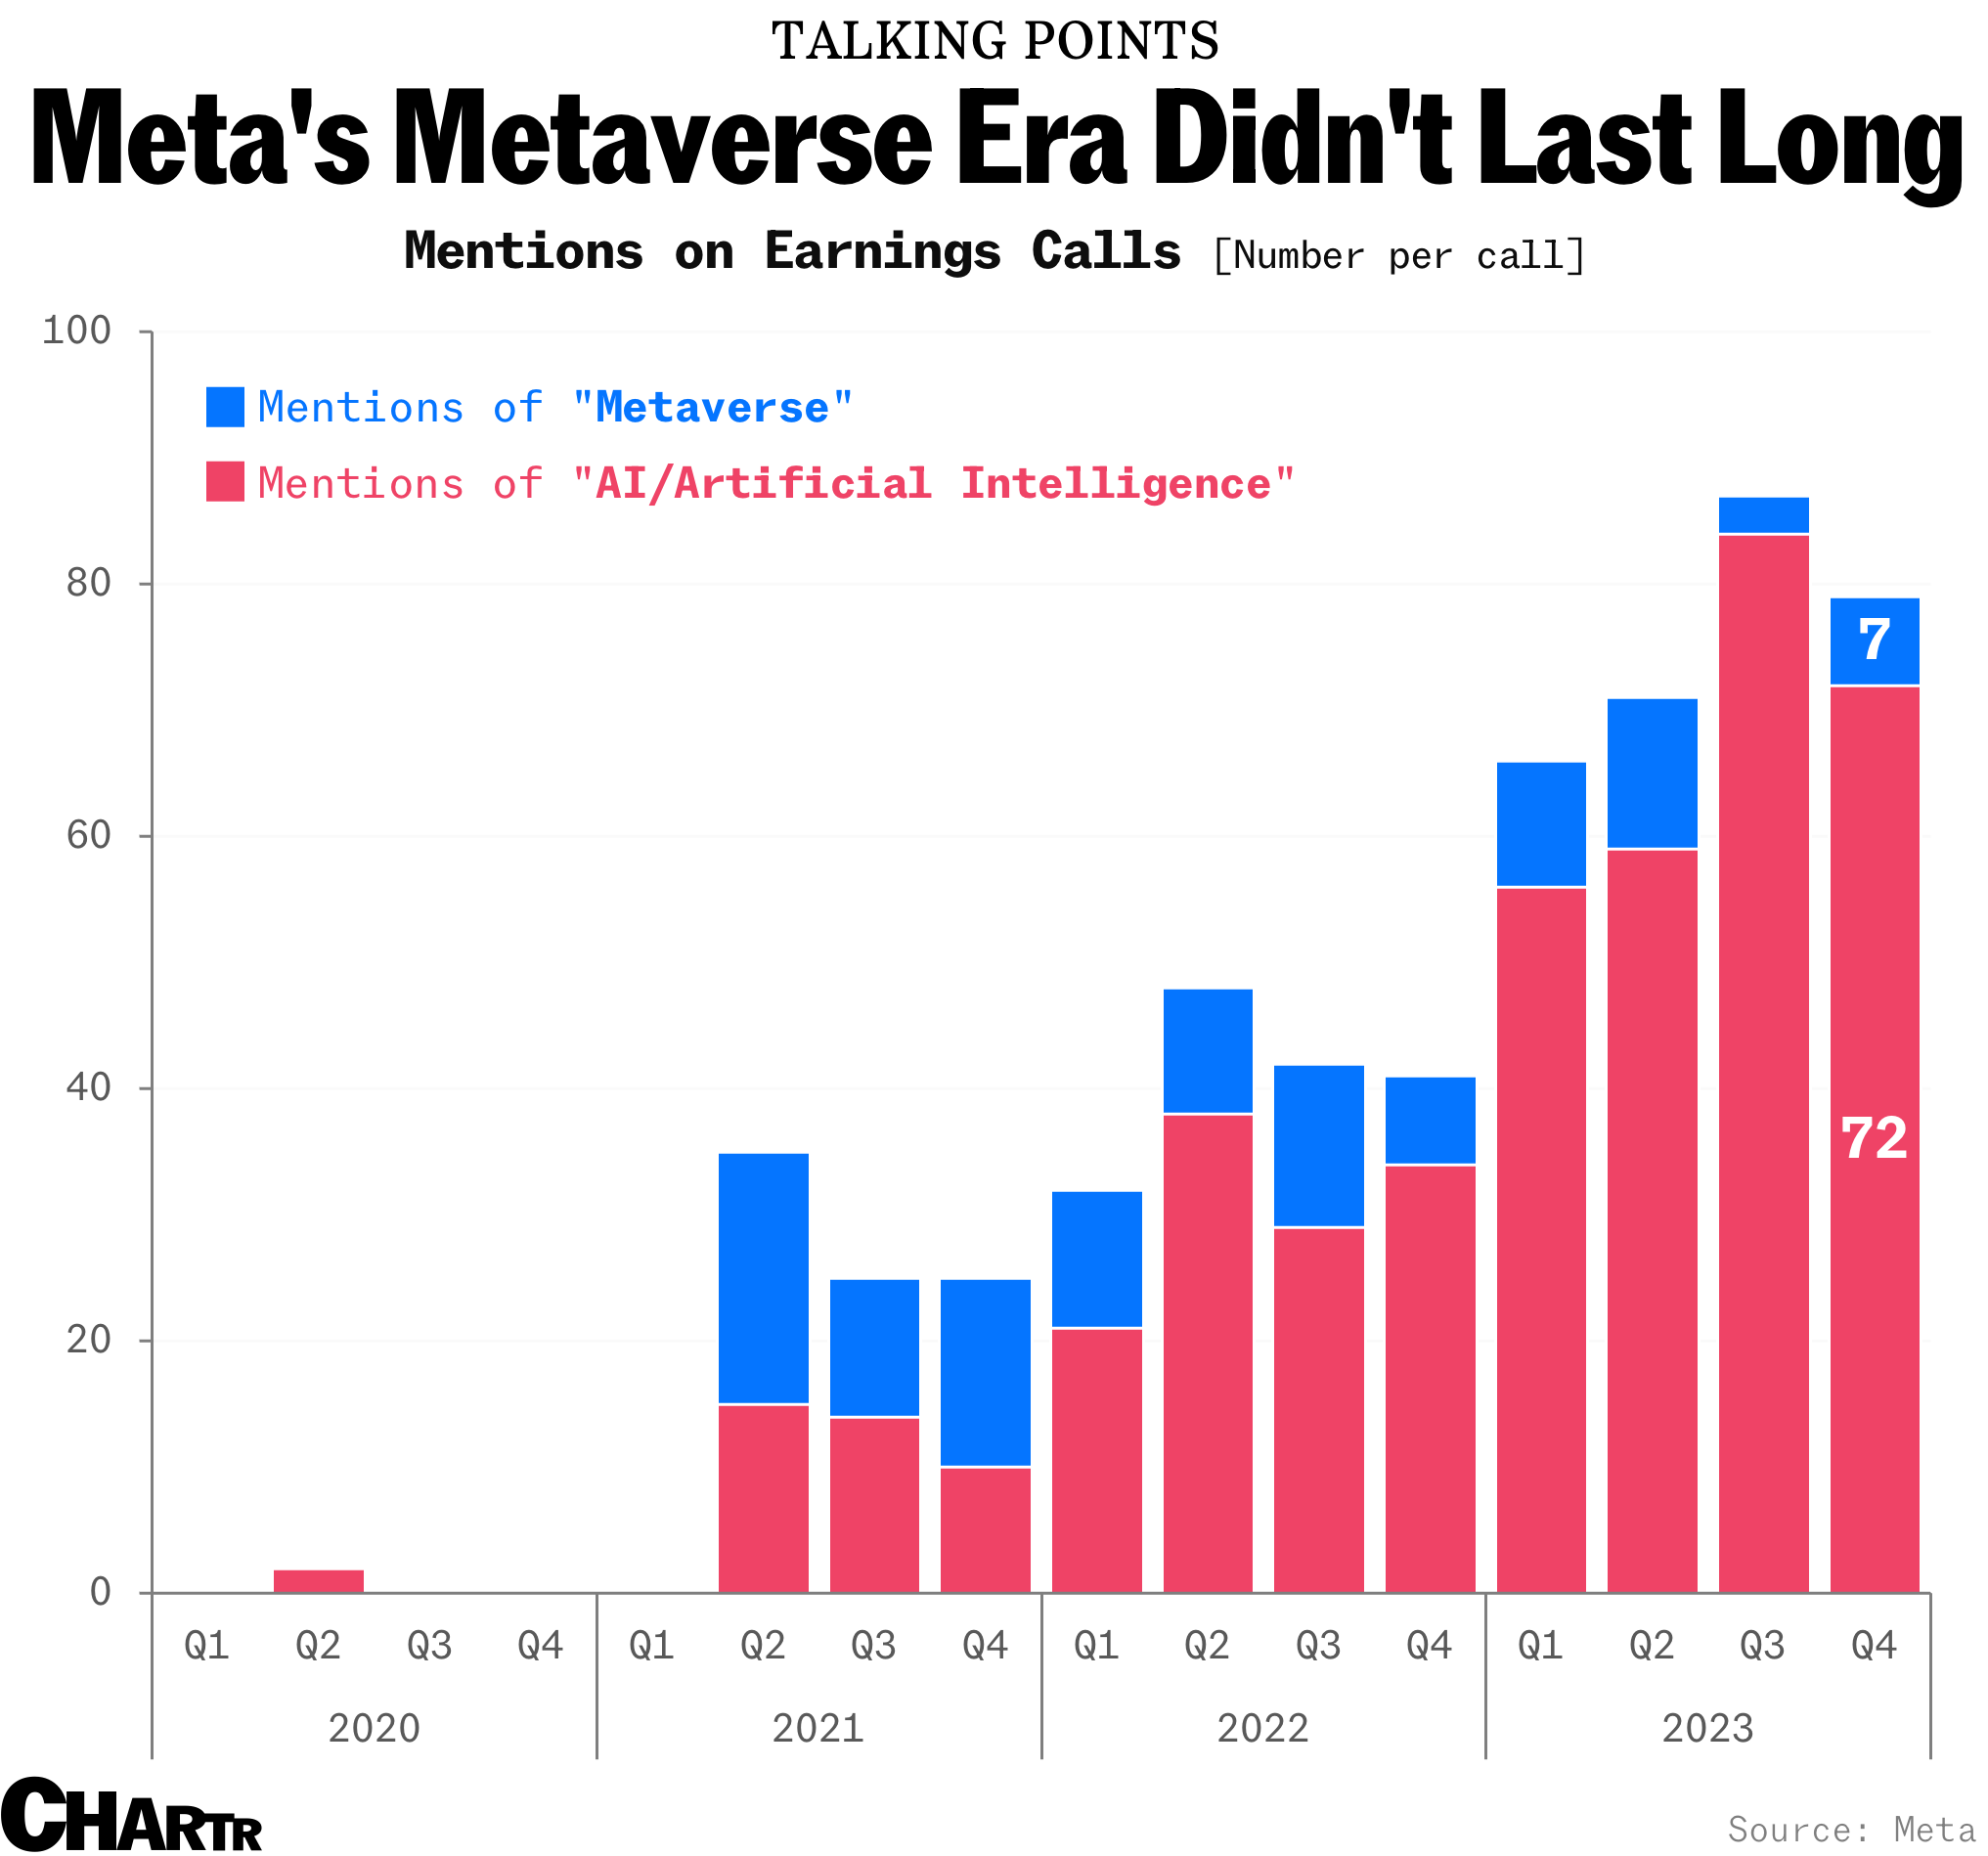 Metaverse mentions